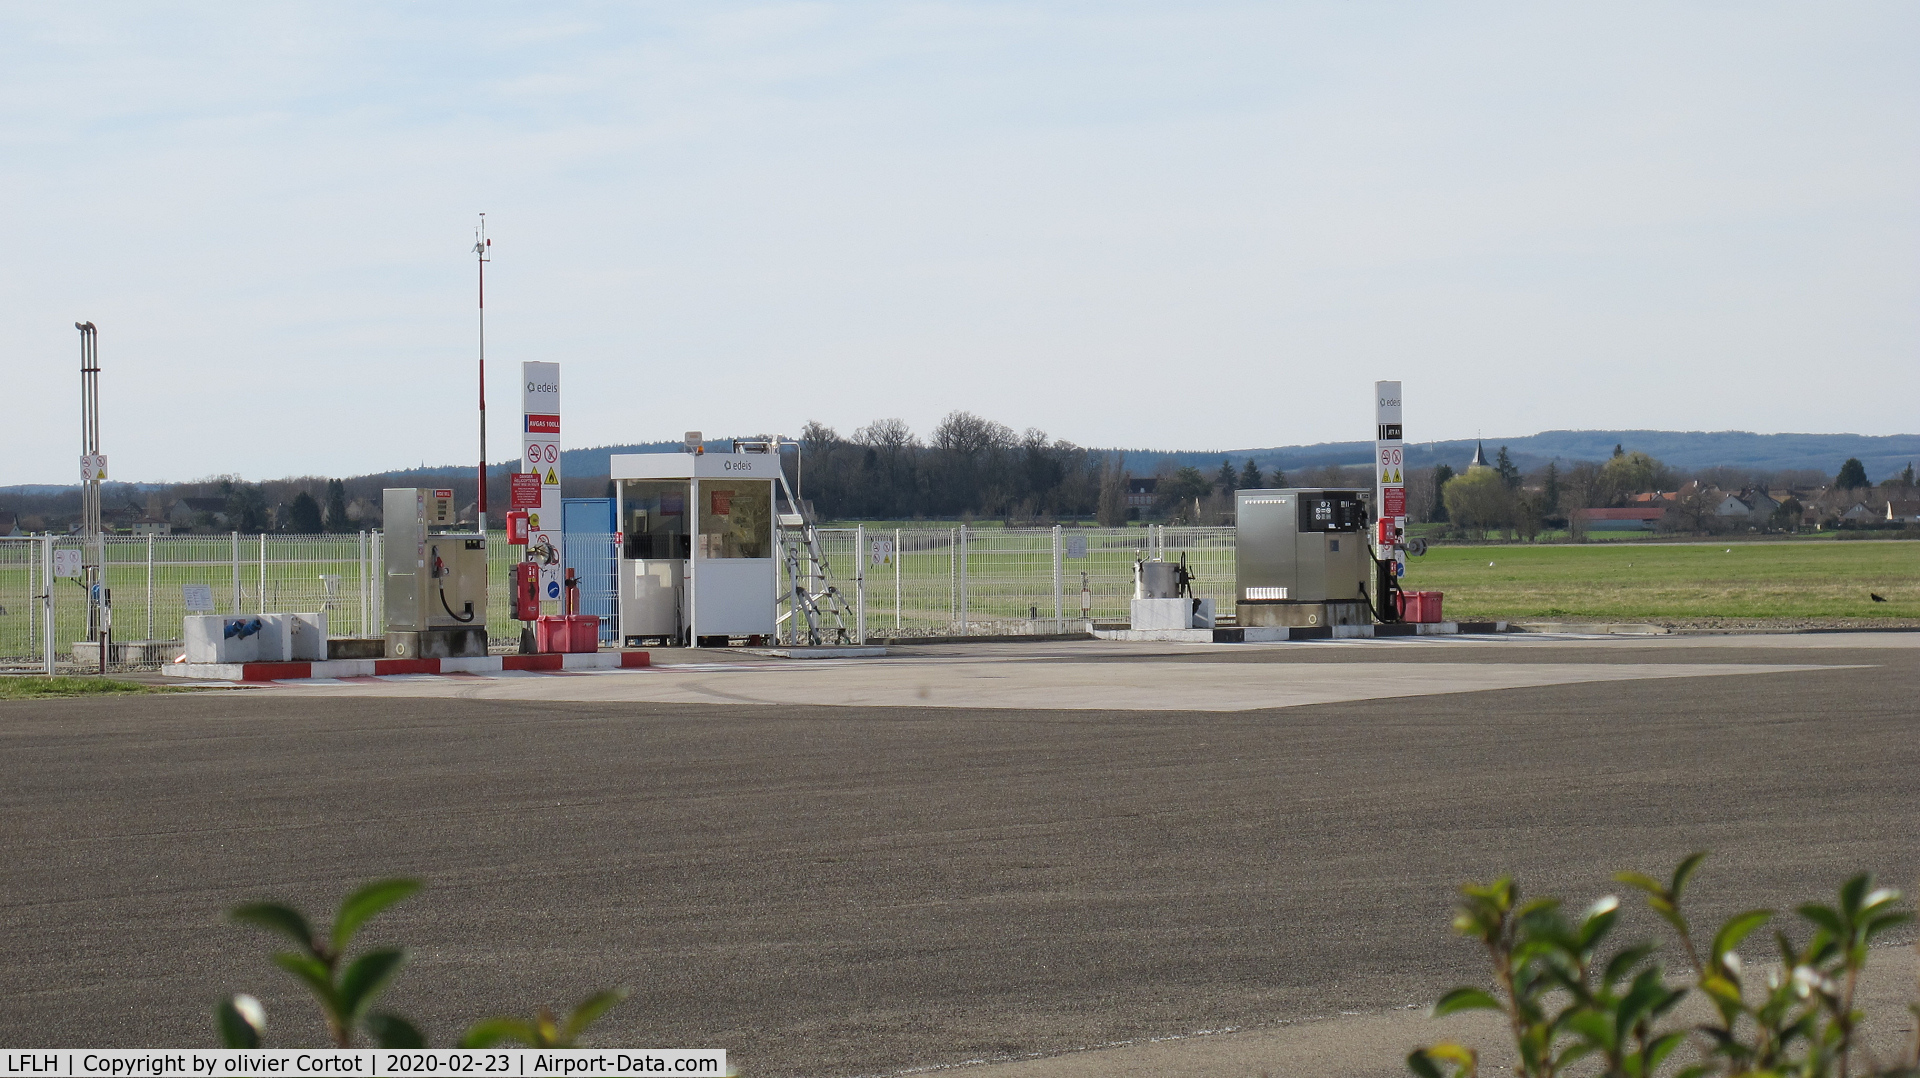 Chalon Champforgeuil Airport, Chalon France (LFLH) - the gas station